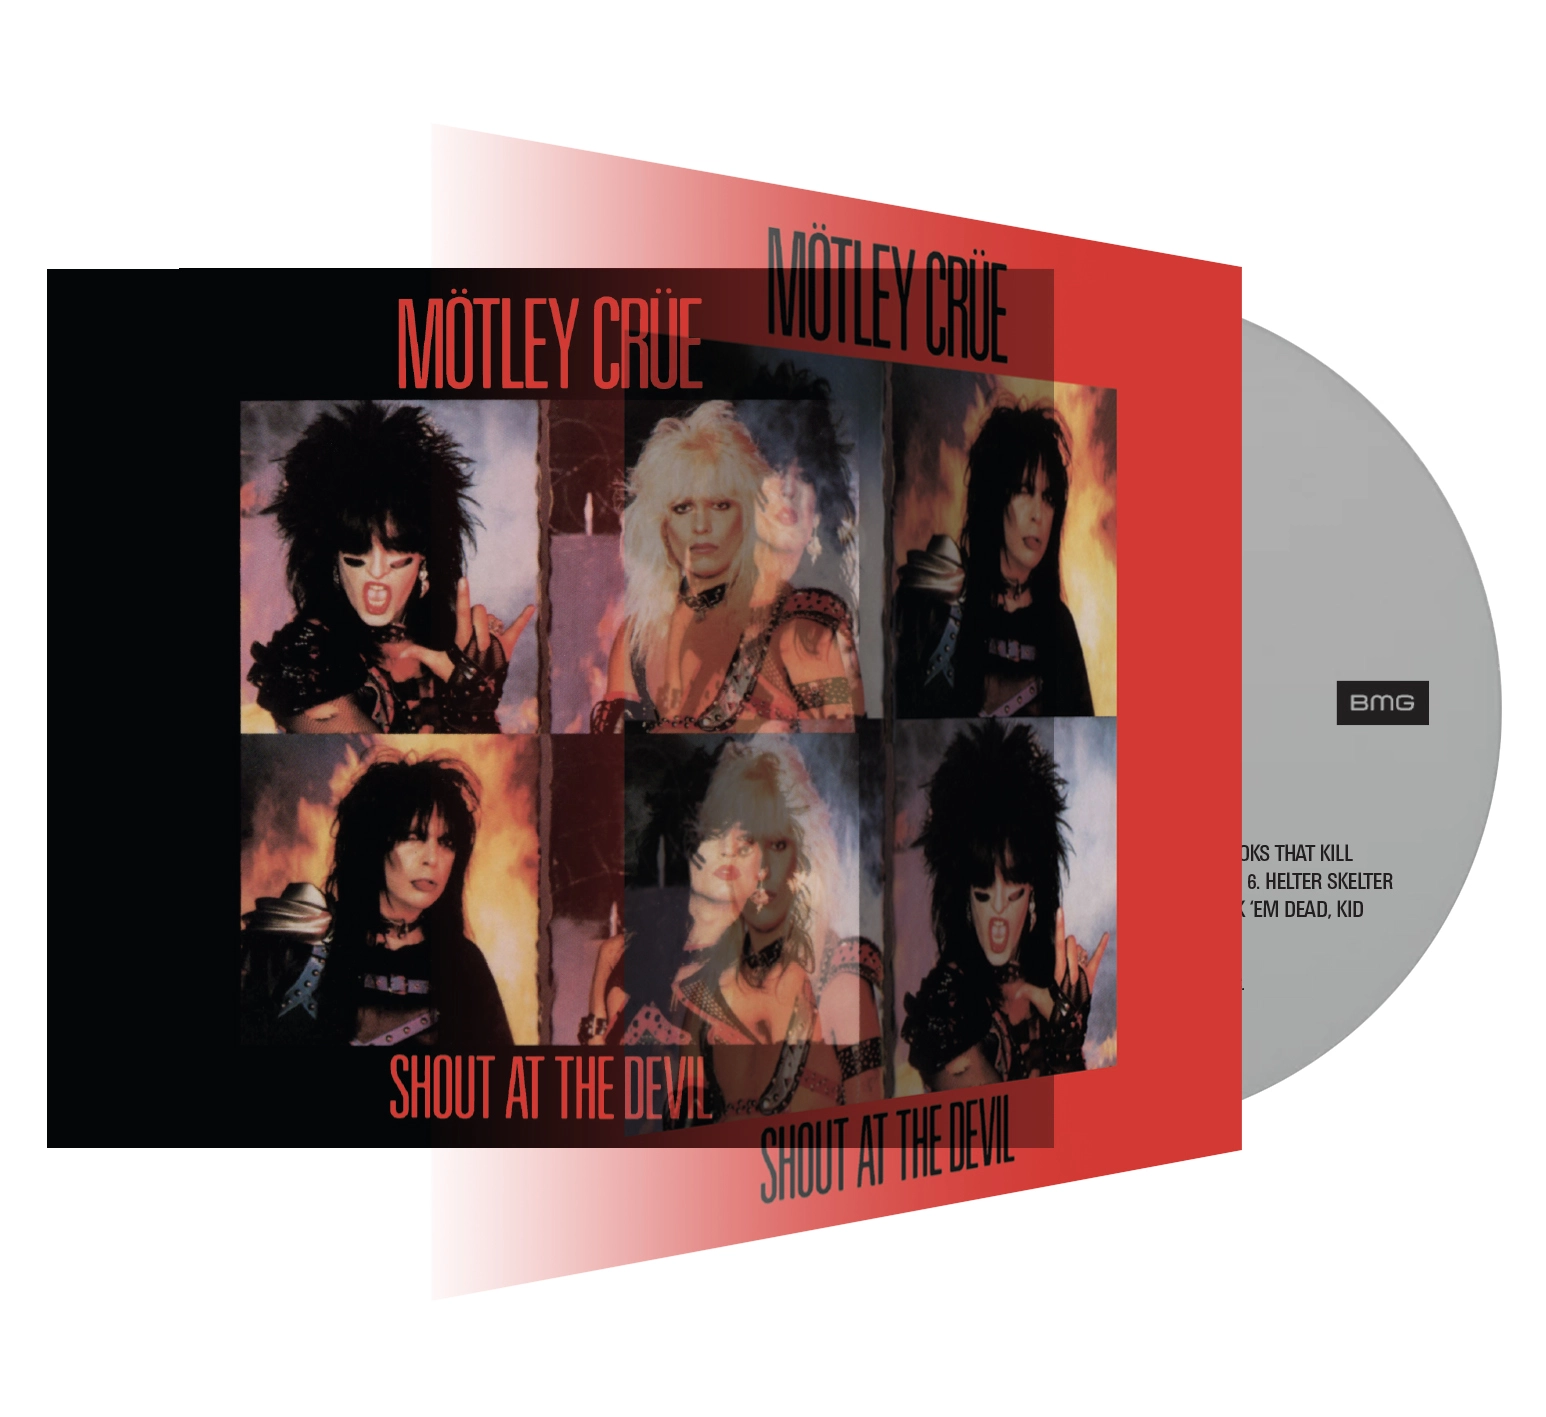 MÖTLEY CRÜE - Shout At The Devil (Limited Edition Lenticular) [CD]